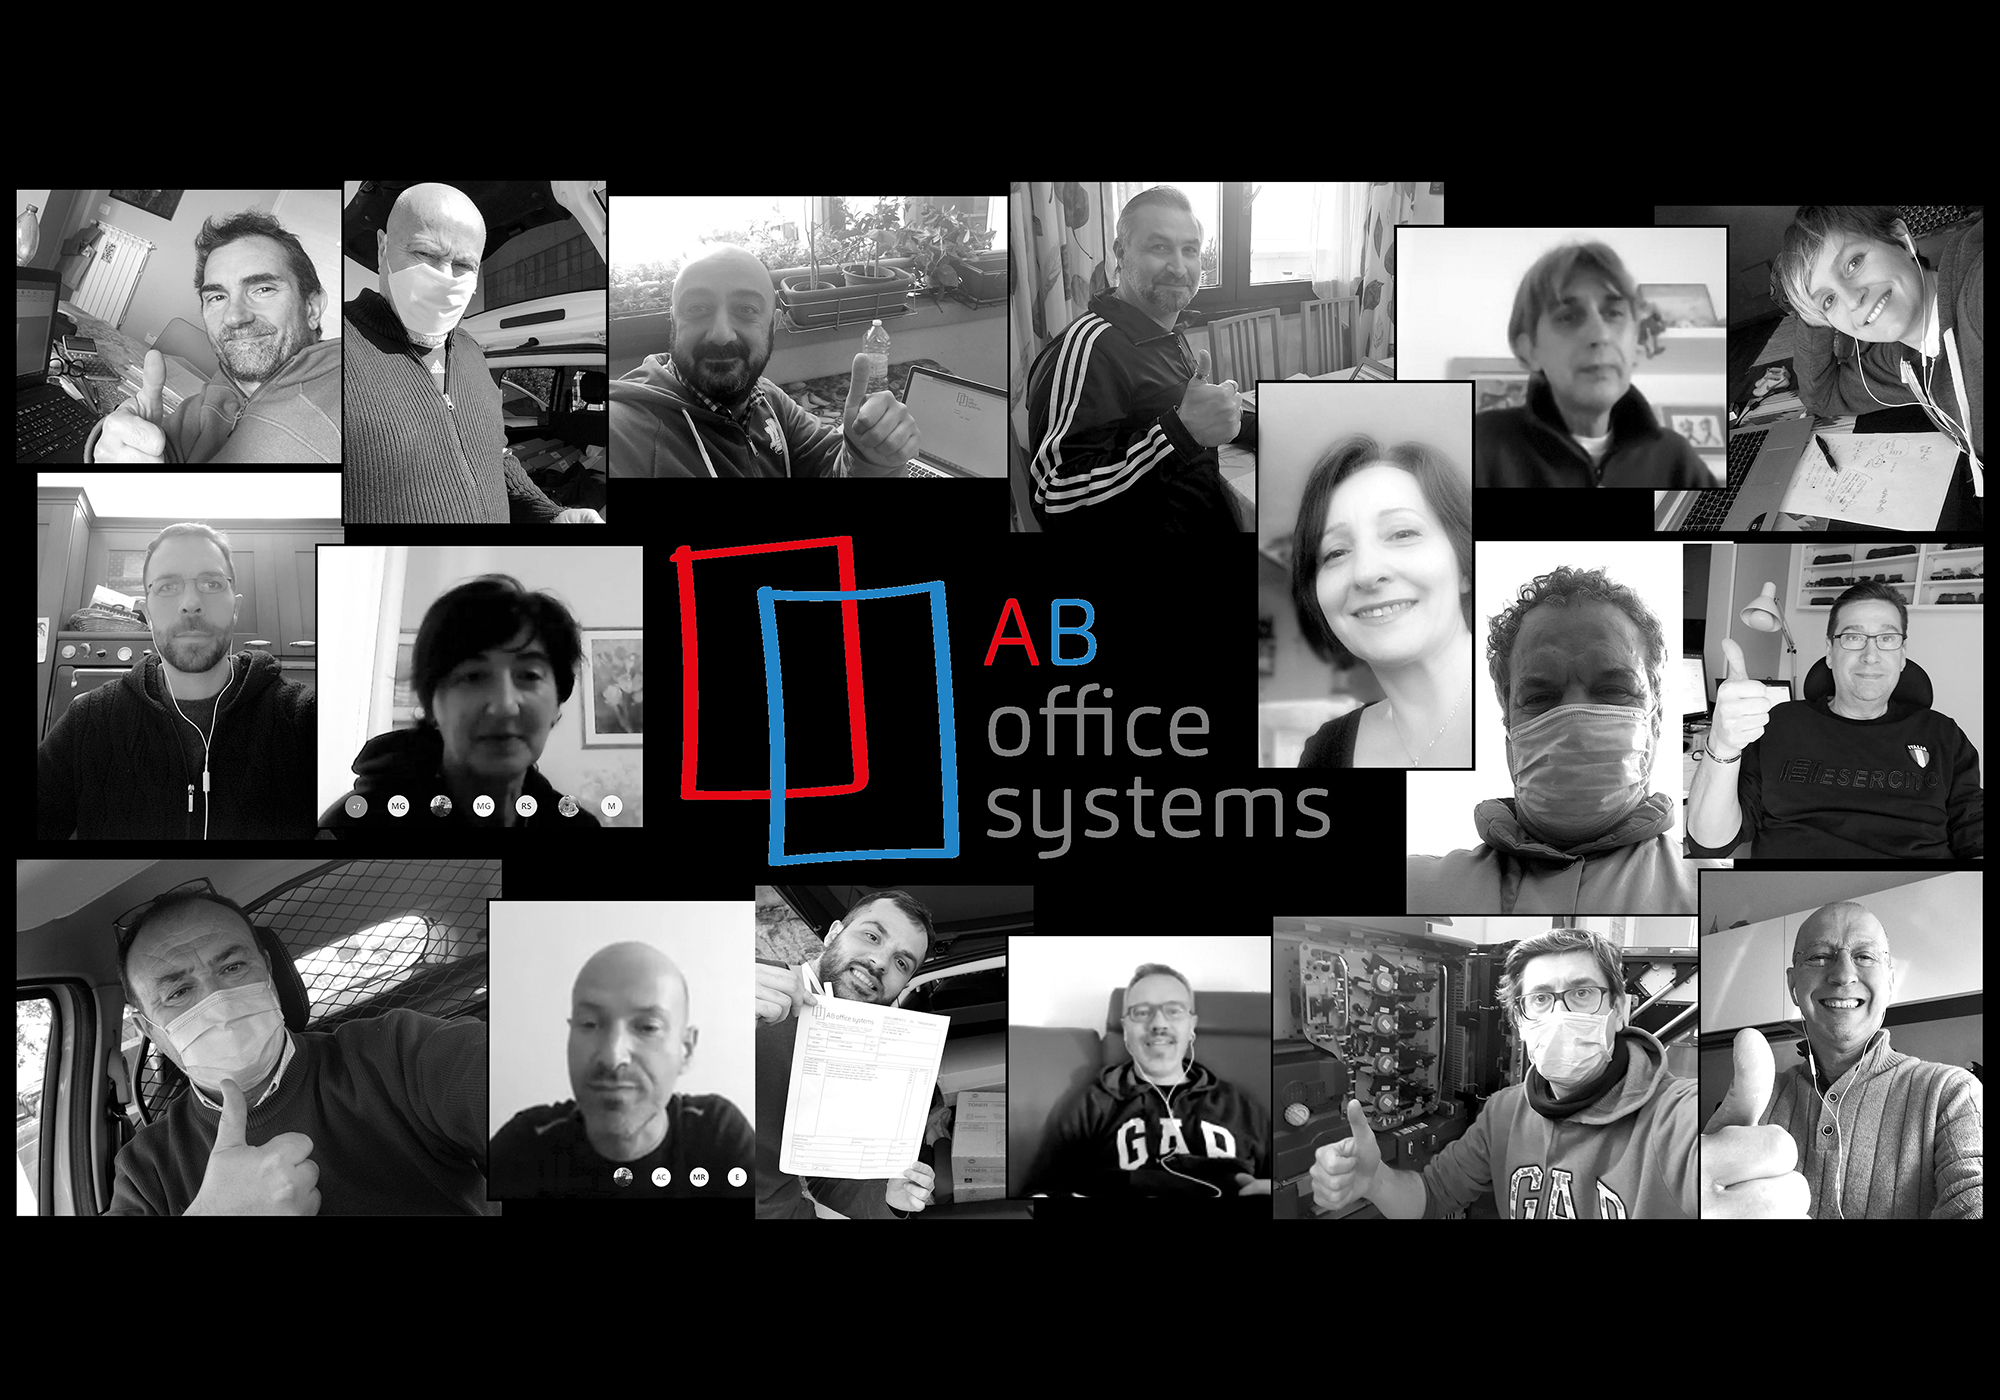 Fase 2 - AB Office Systems team